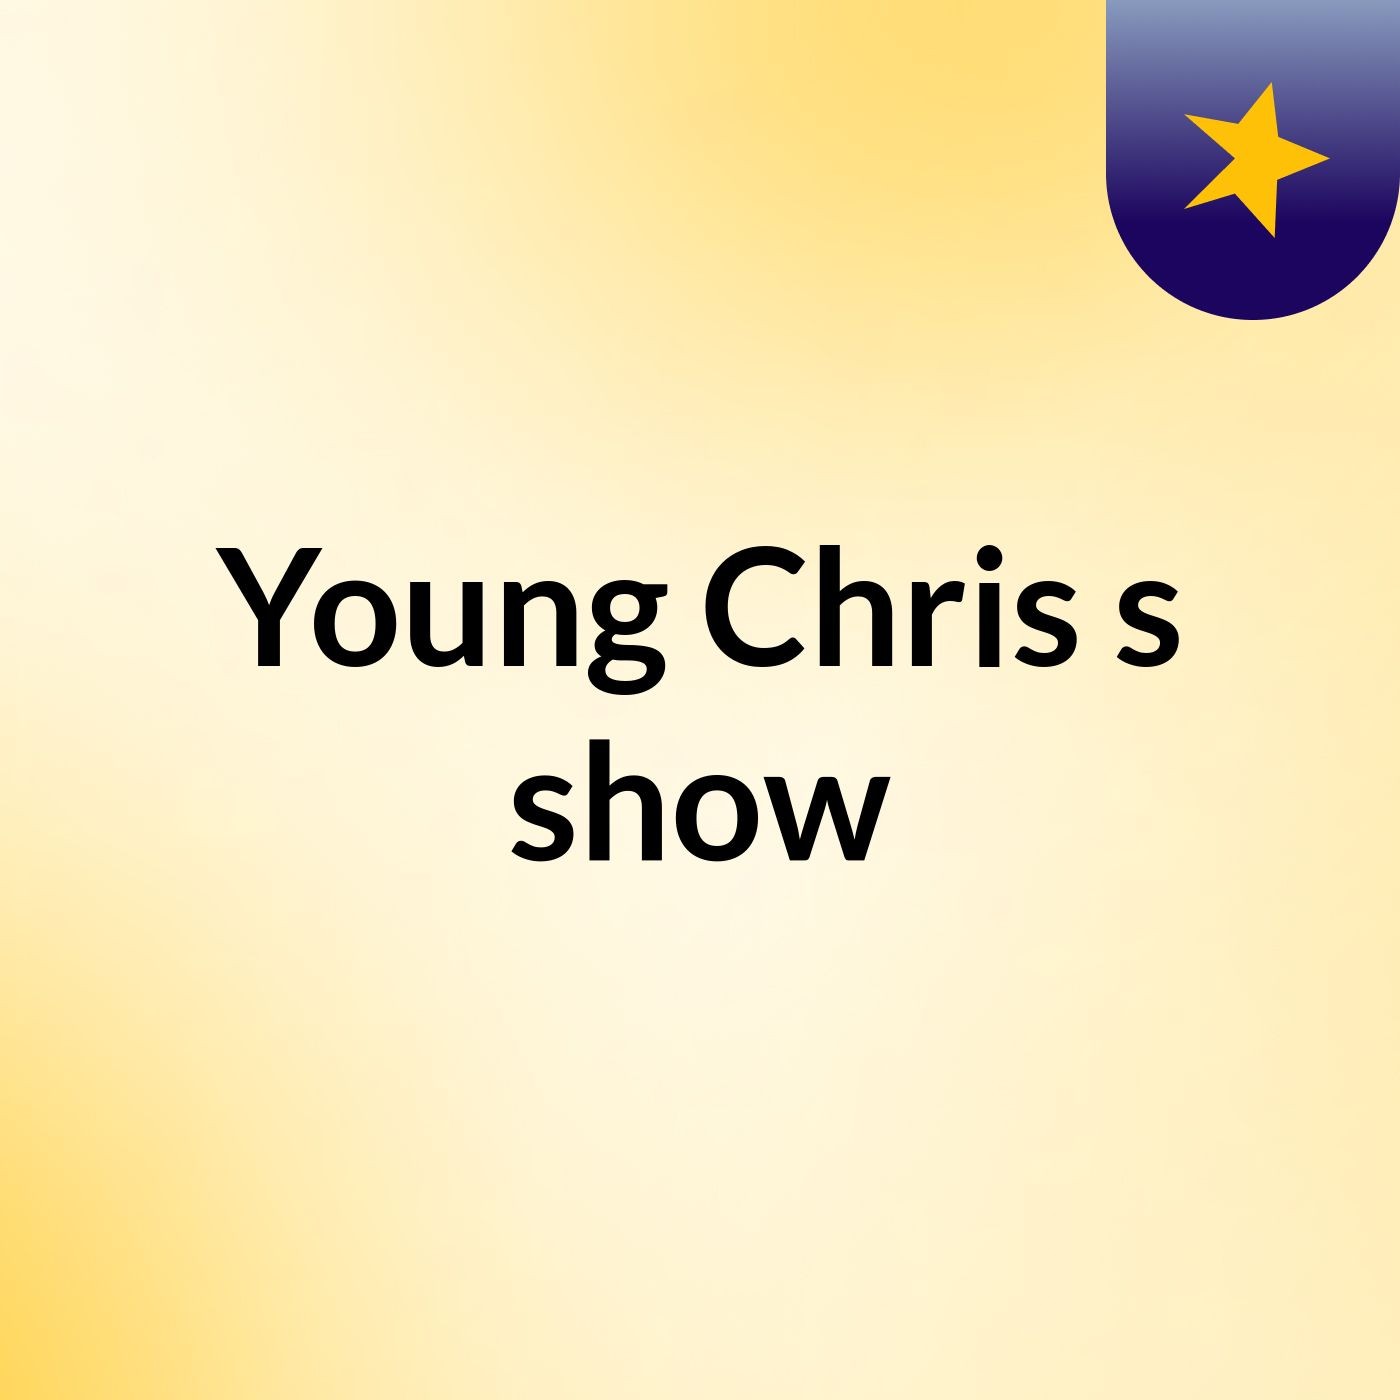 Episode 11 - Young Chris's show